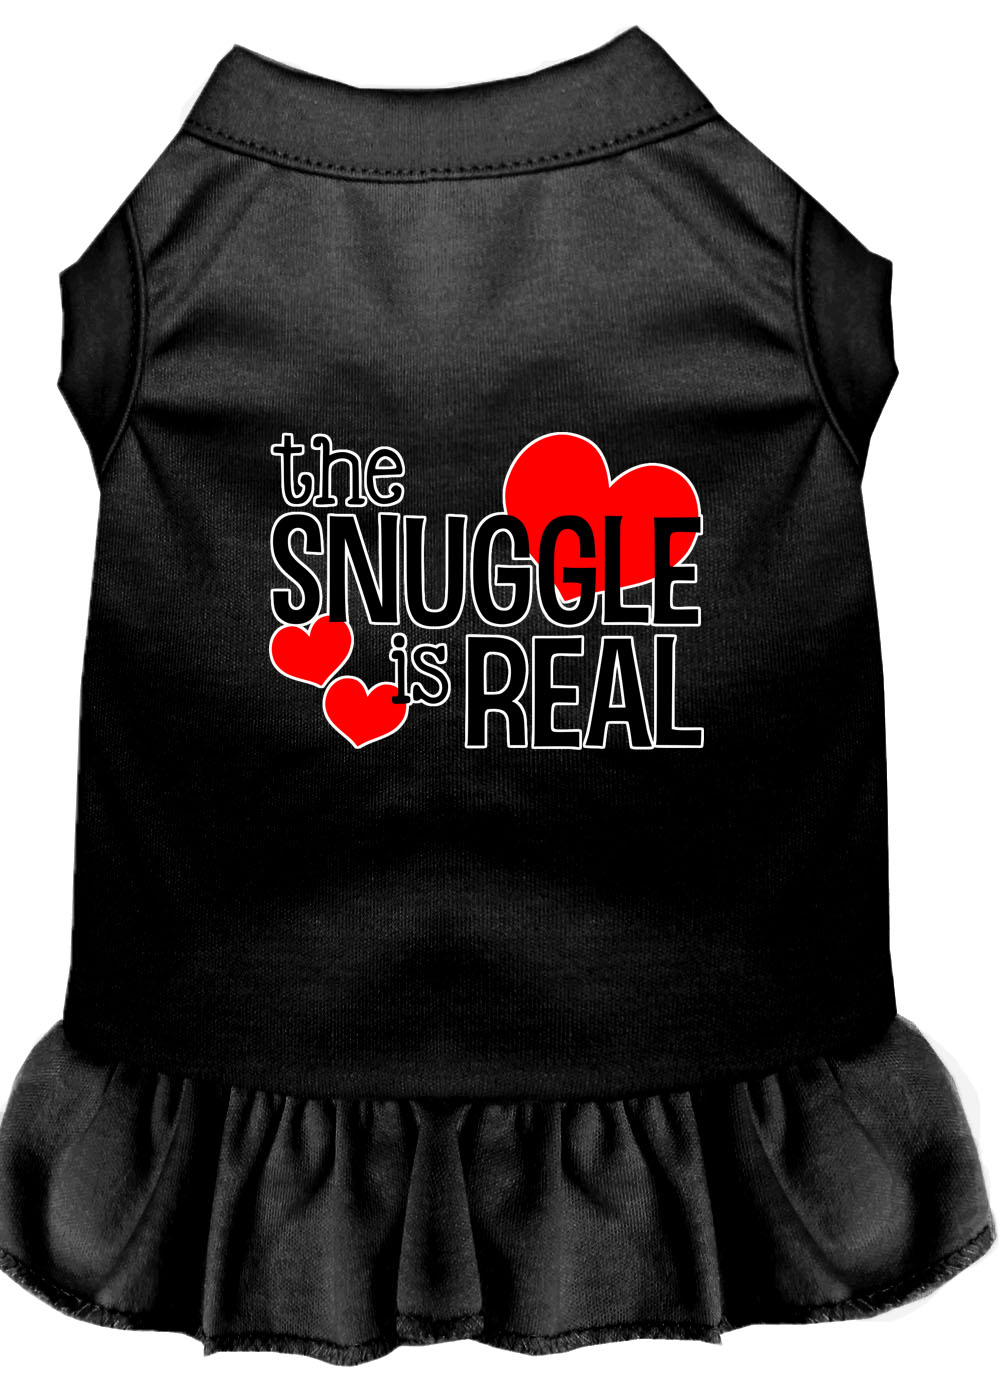 The Snuggle is Real Screen Print Dog Dress Black Med